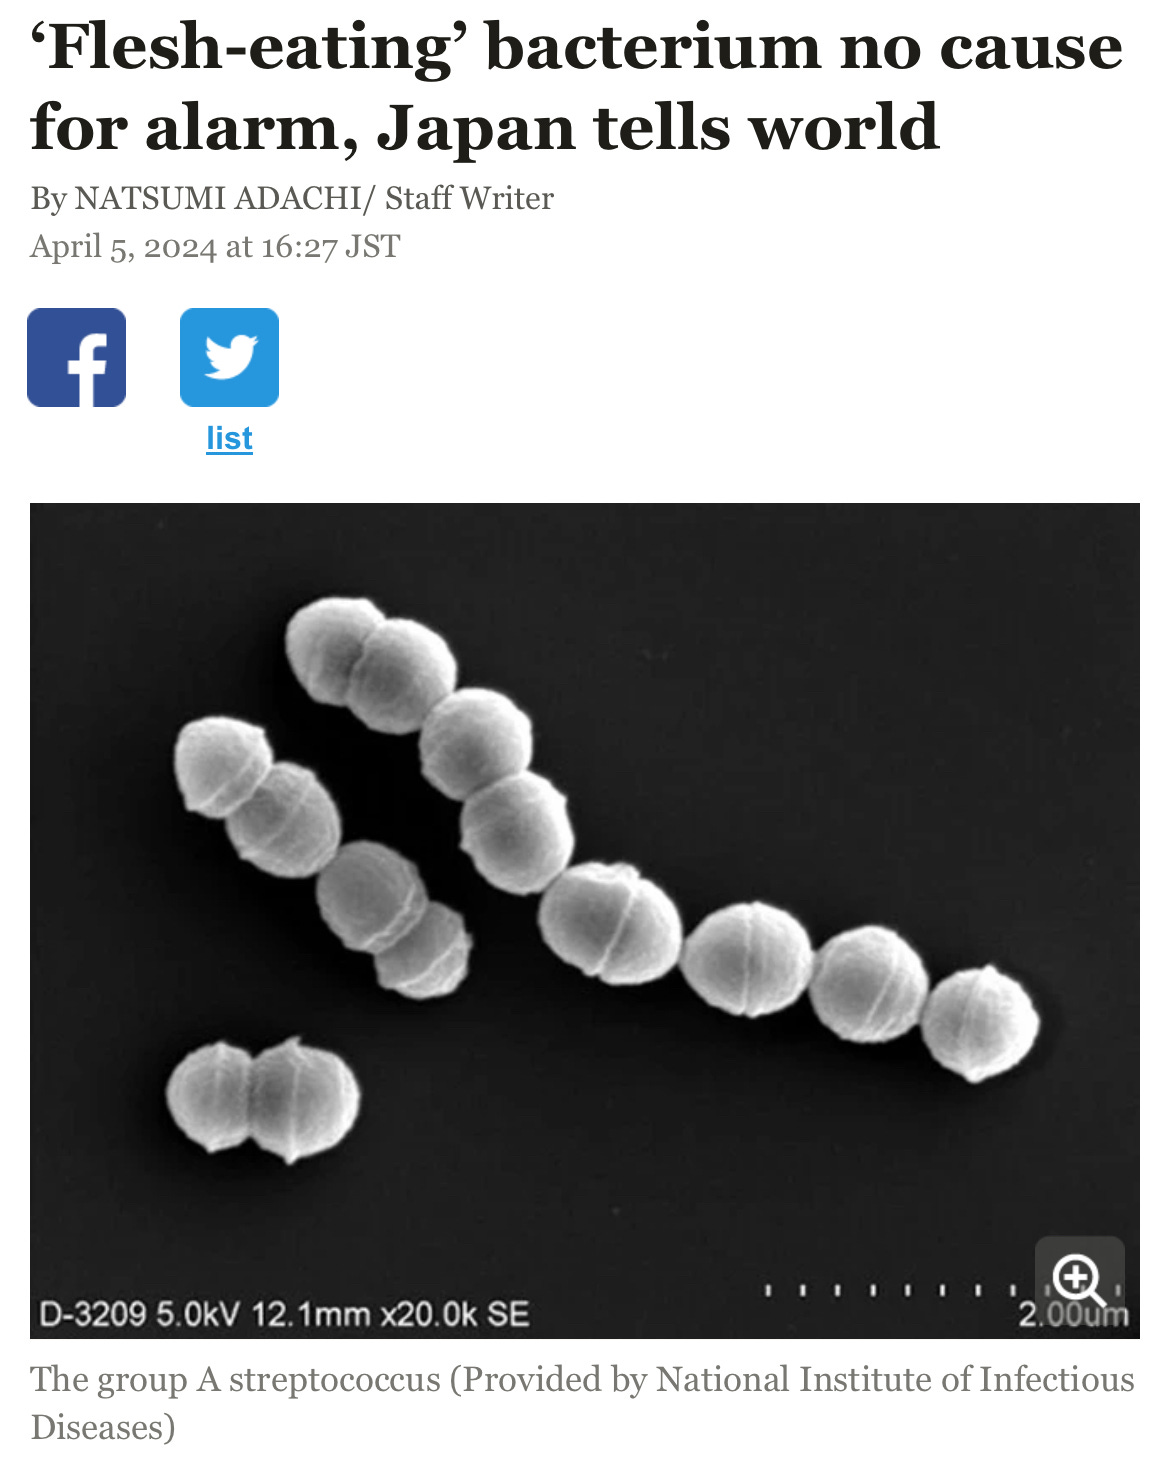 Screen shot of news article with the headline 'Flesh-eating bacterium no cause for alarm, Japan tells world' and a close up image of a chain of bacteria